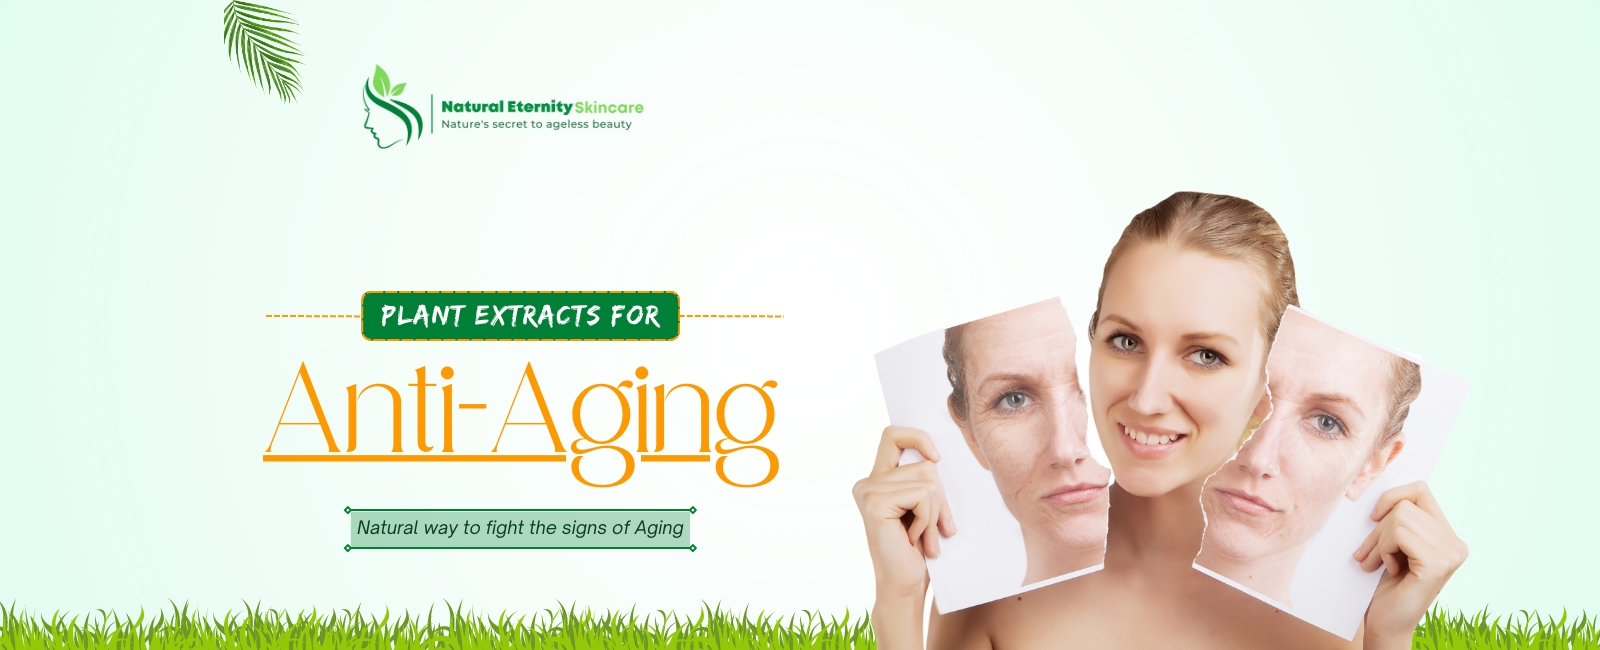 Plants Extracts for Anti-Aging